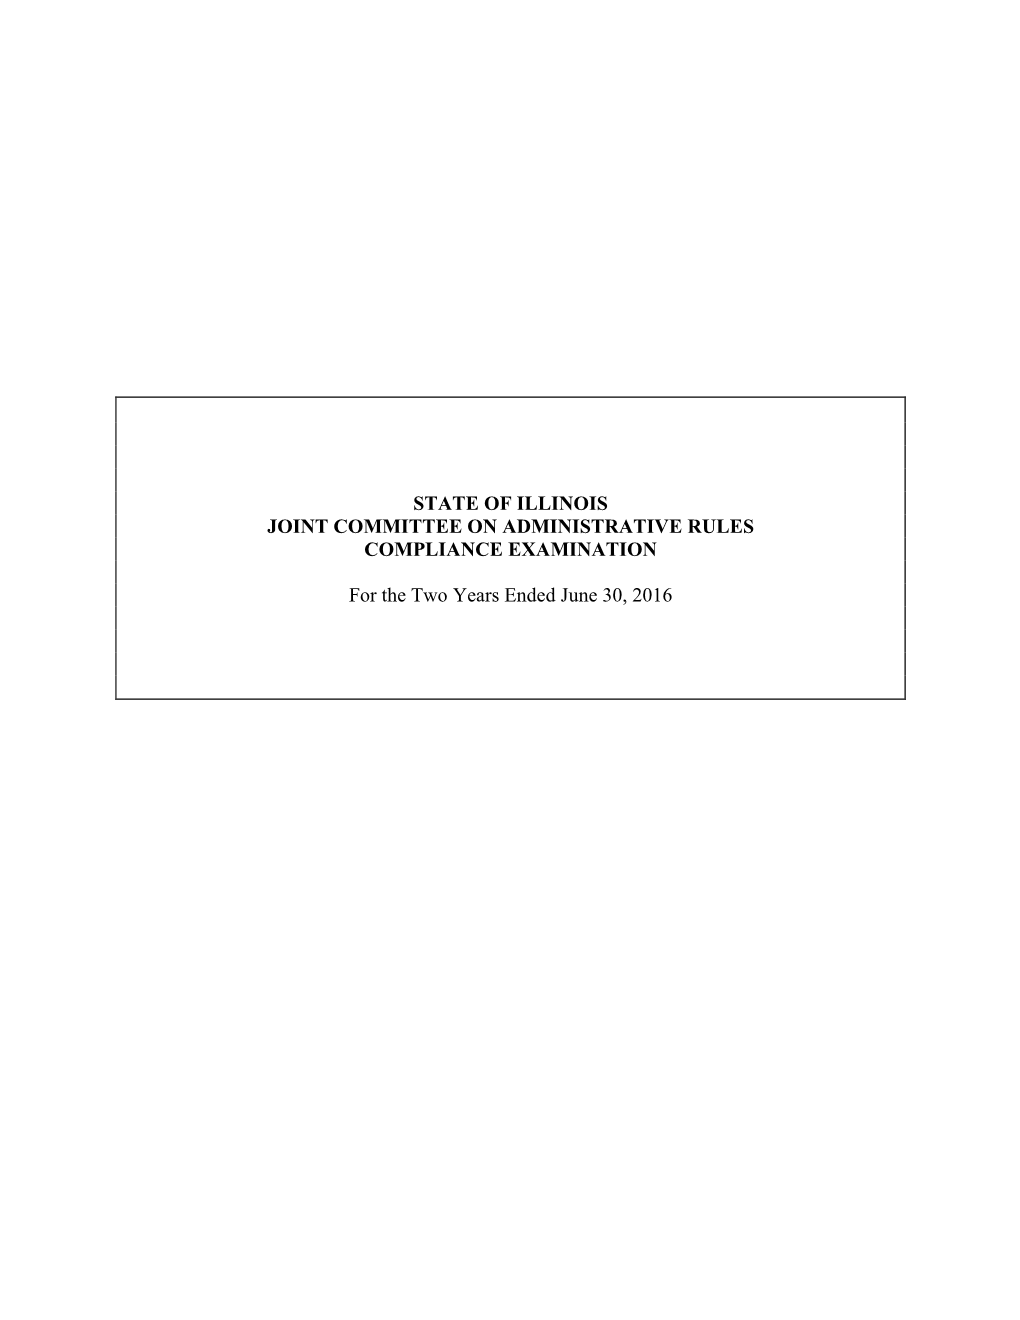 State of Illinois Joint Committee on Administrative Rules Compliance Examination